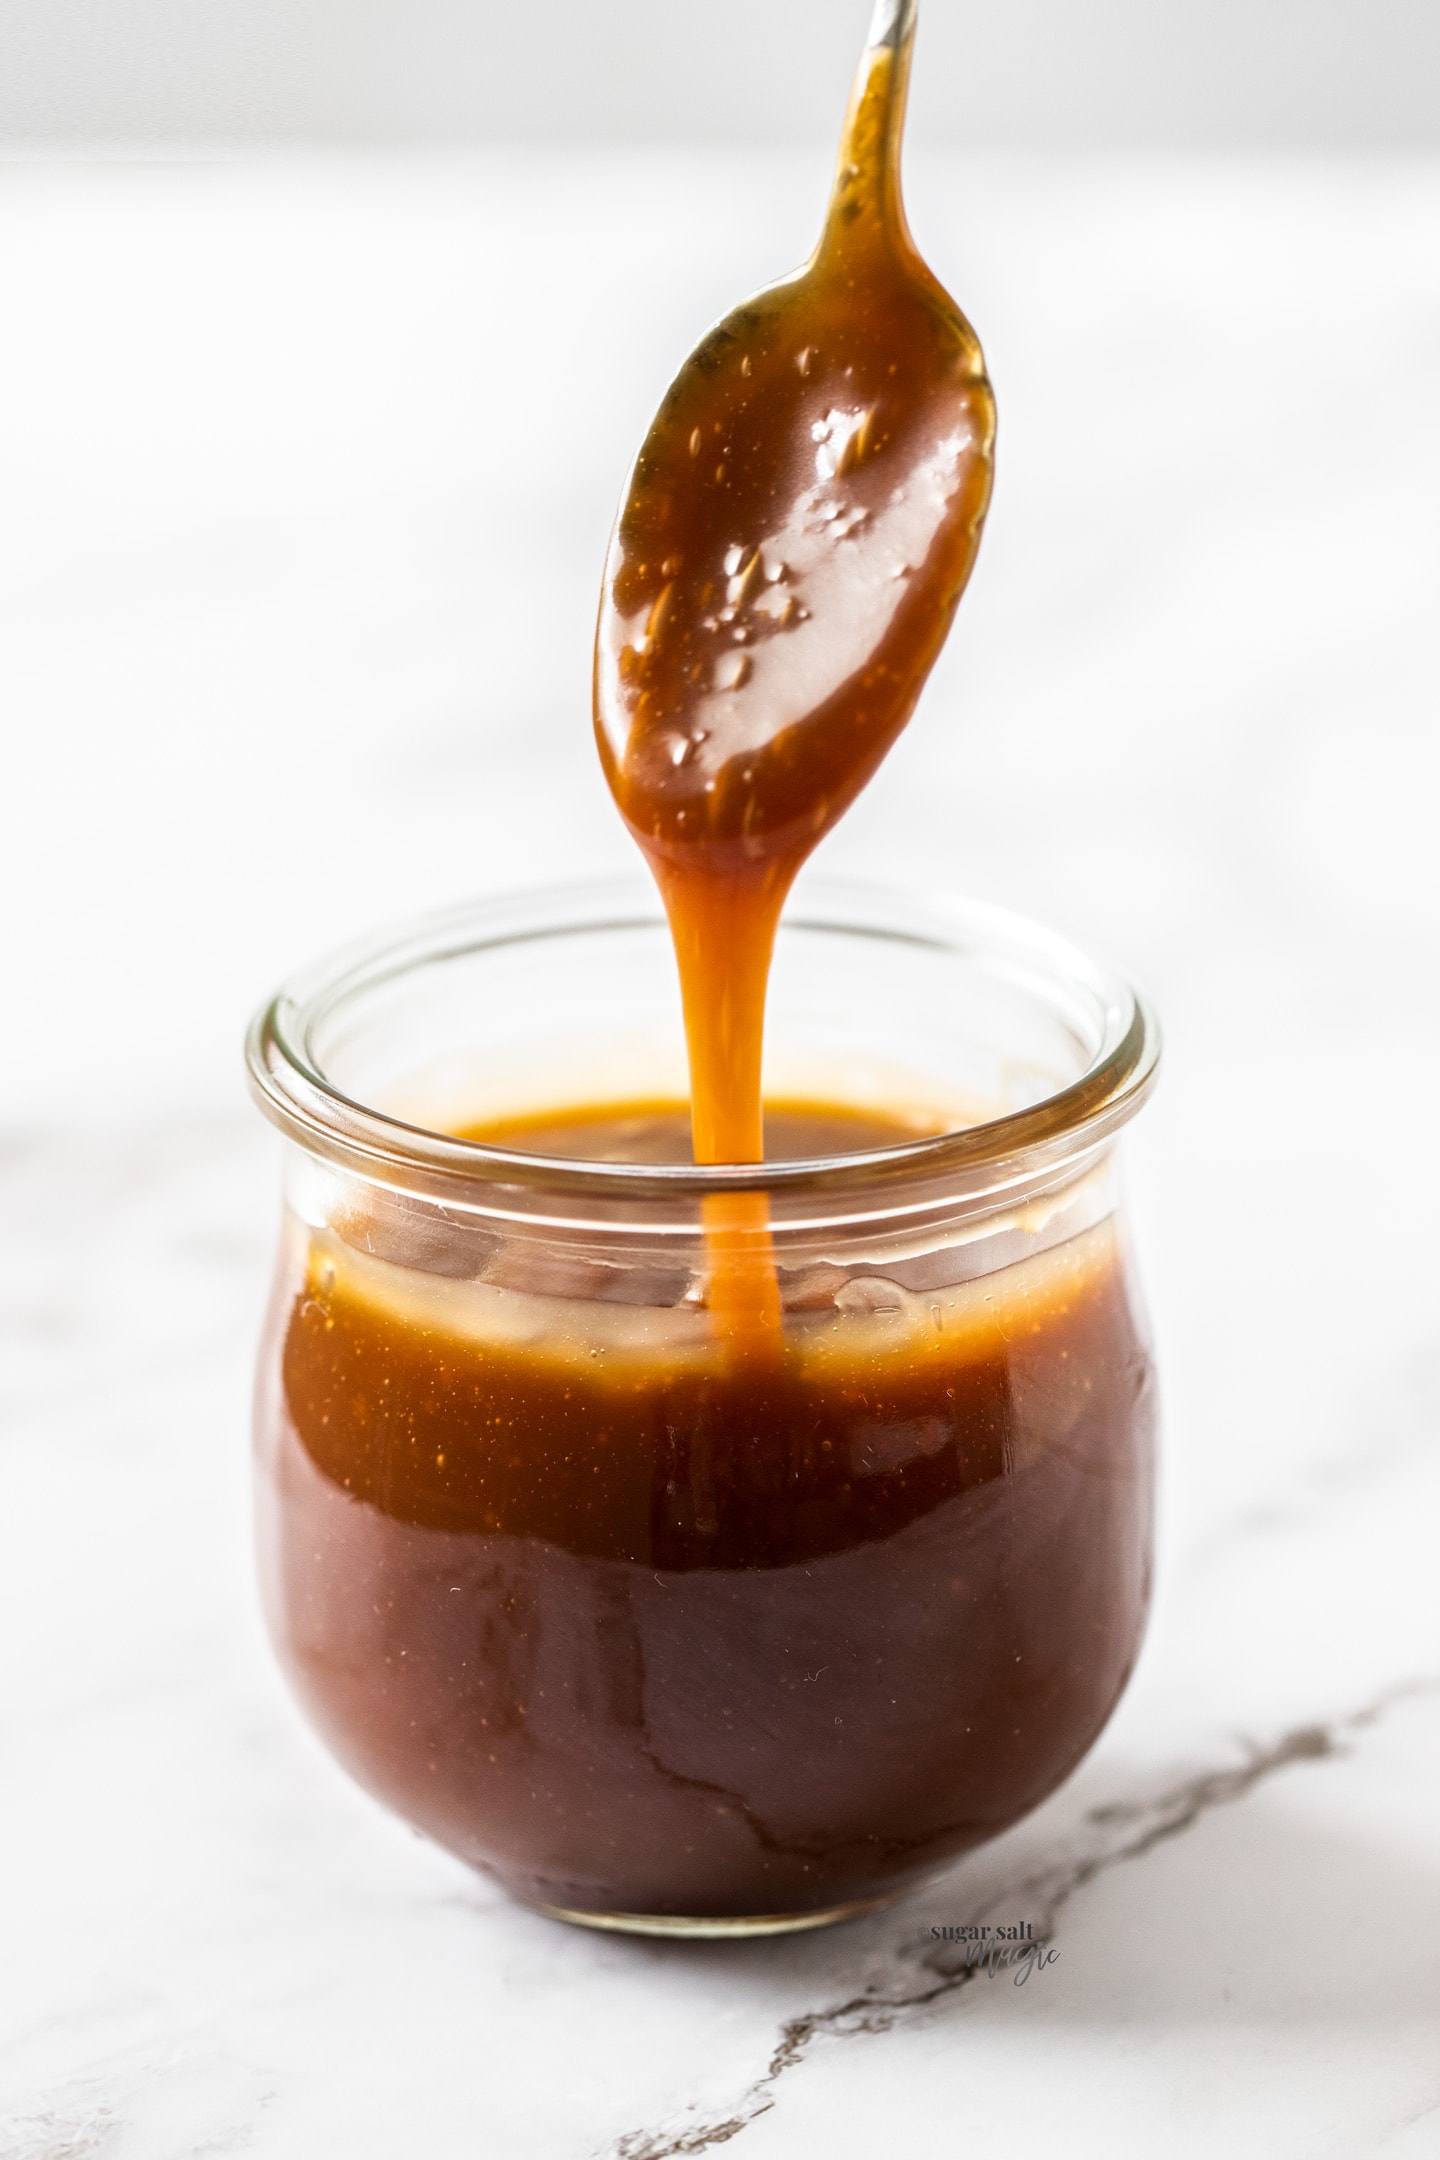 Caramel pouring off a spoon into a glass jar.